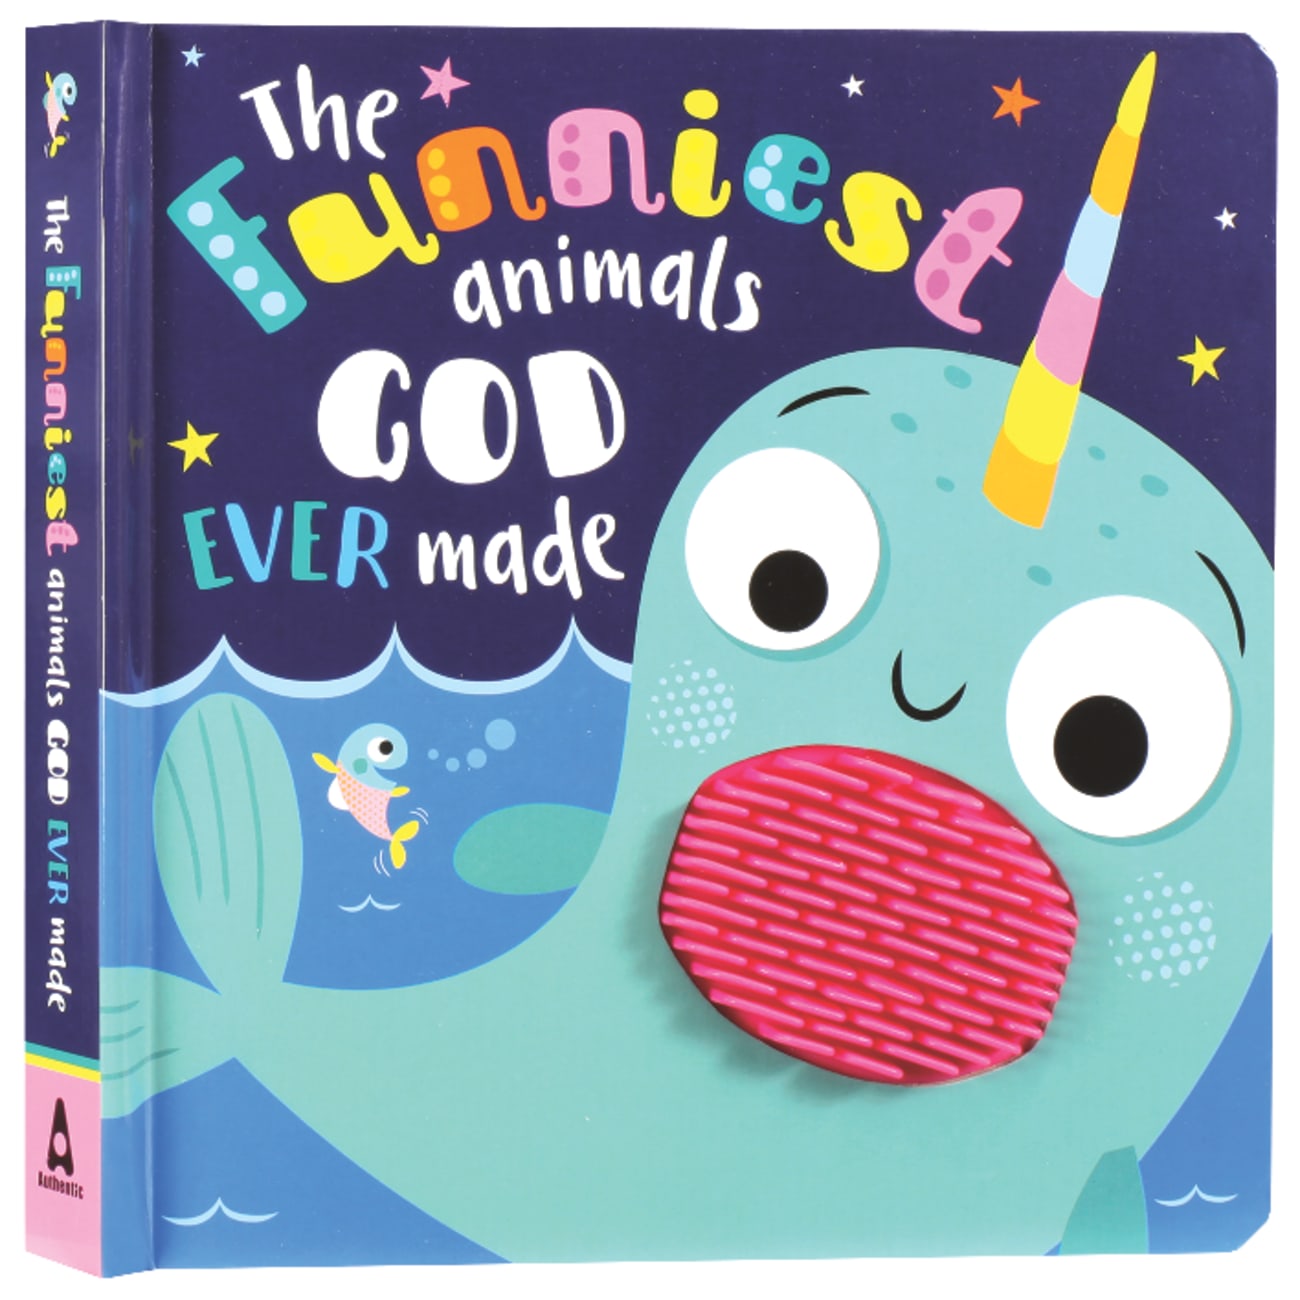 The Funniest Animals God Ever Made by Rosie Greening | Koorong